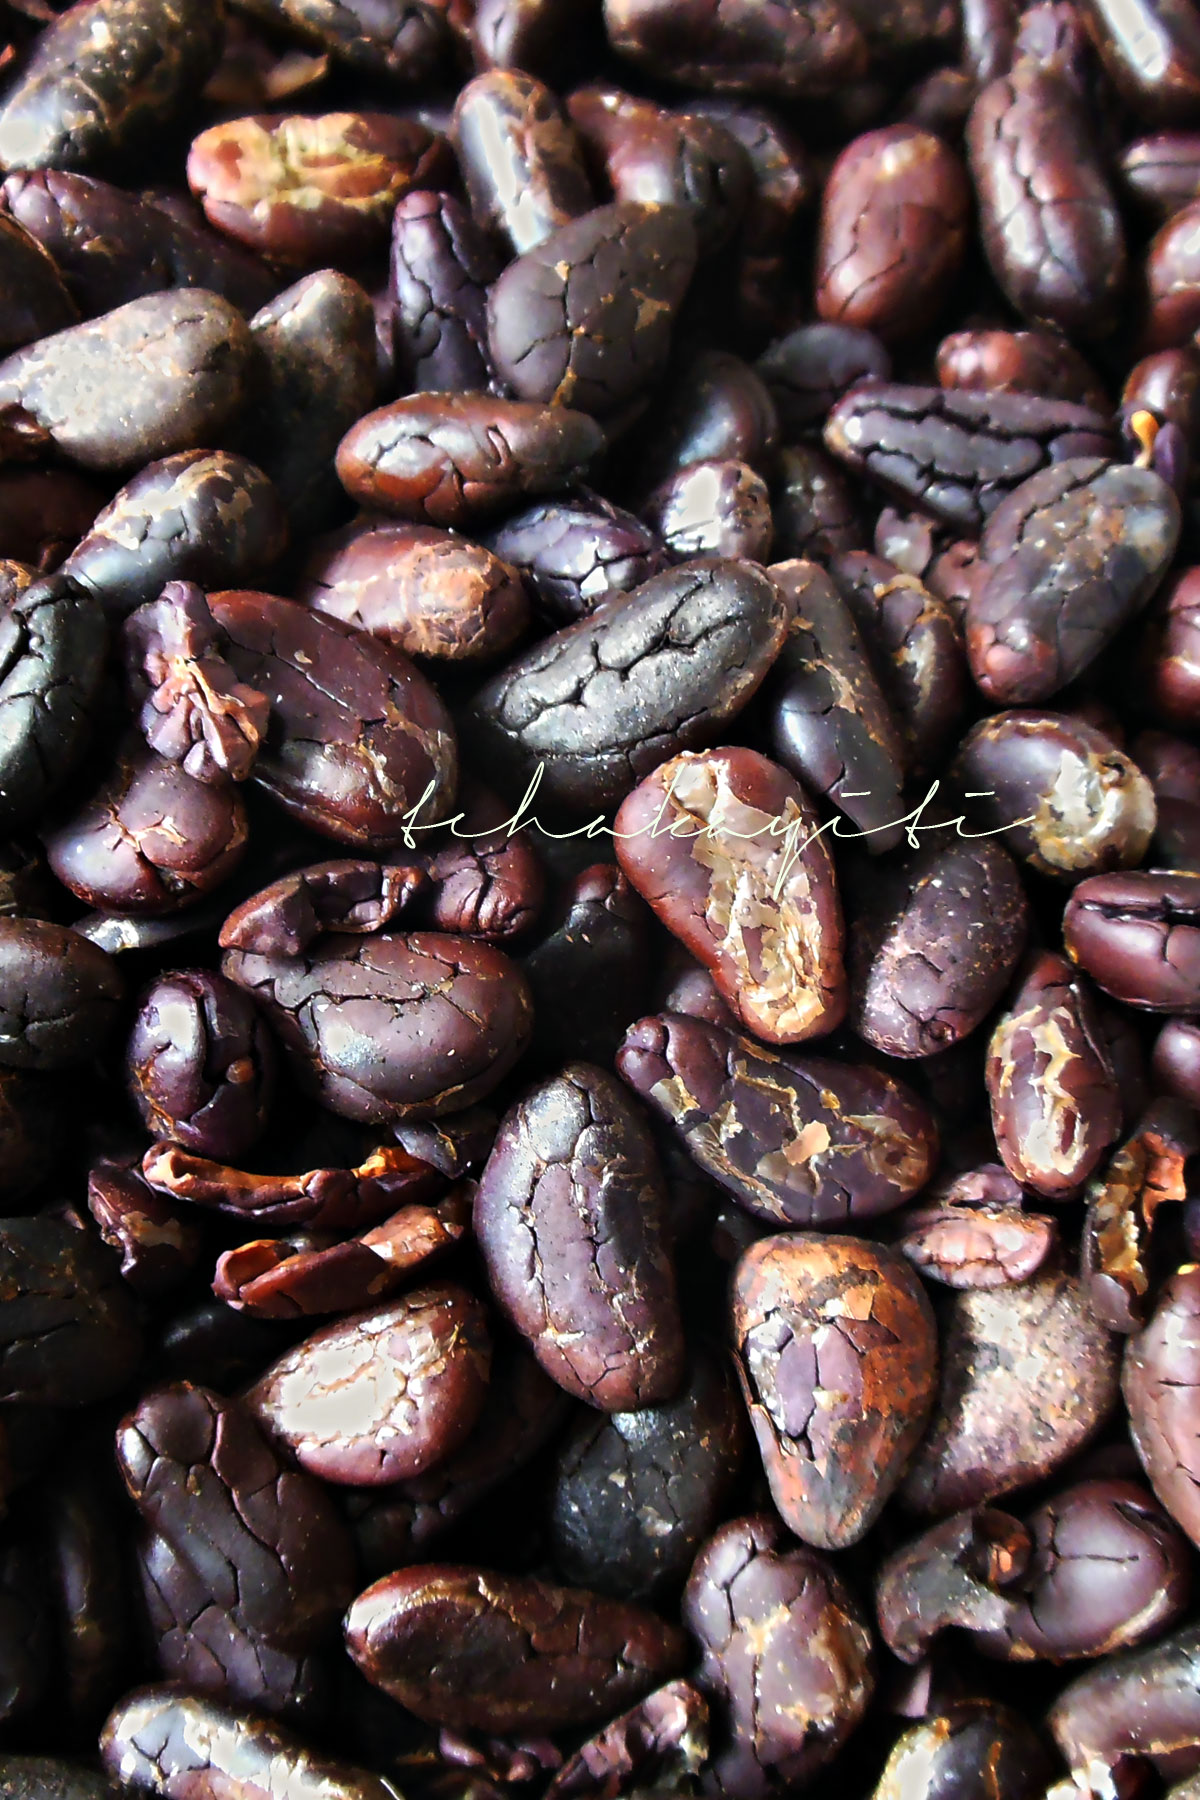 Believe it or not, these are roasted cocoa beans, the first step in the chocolate making process. | tchakayiti.com